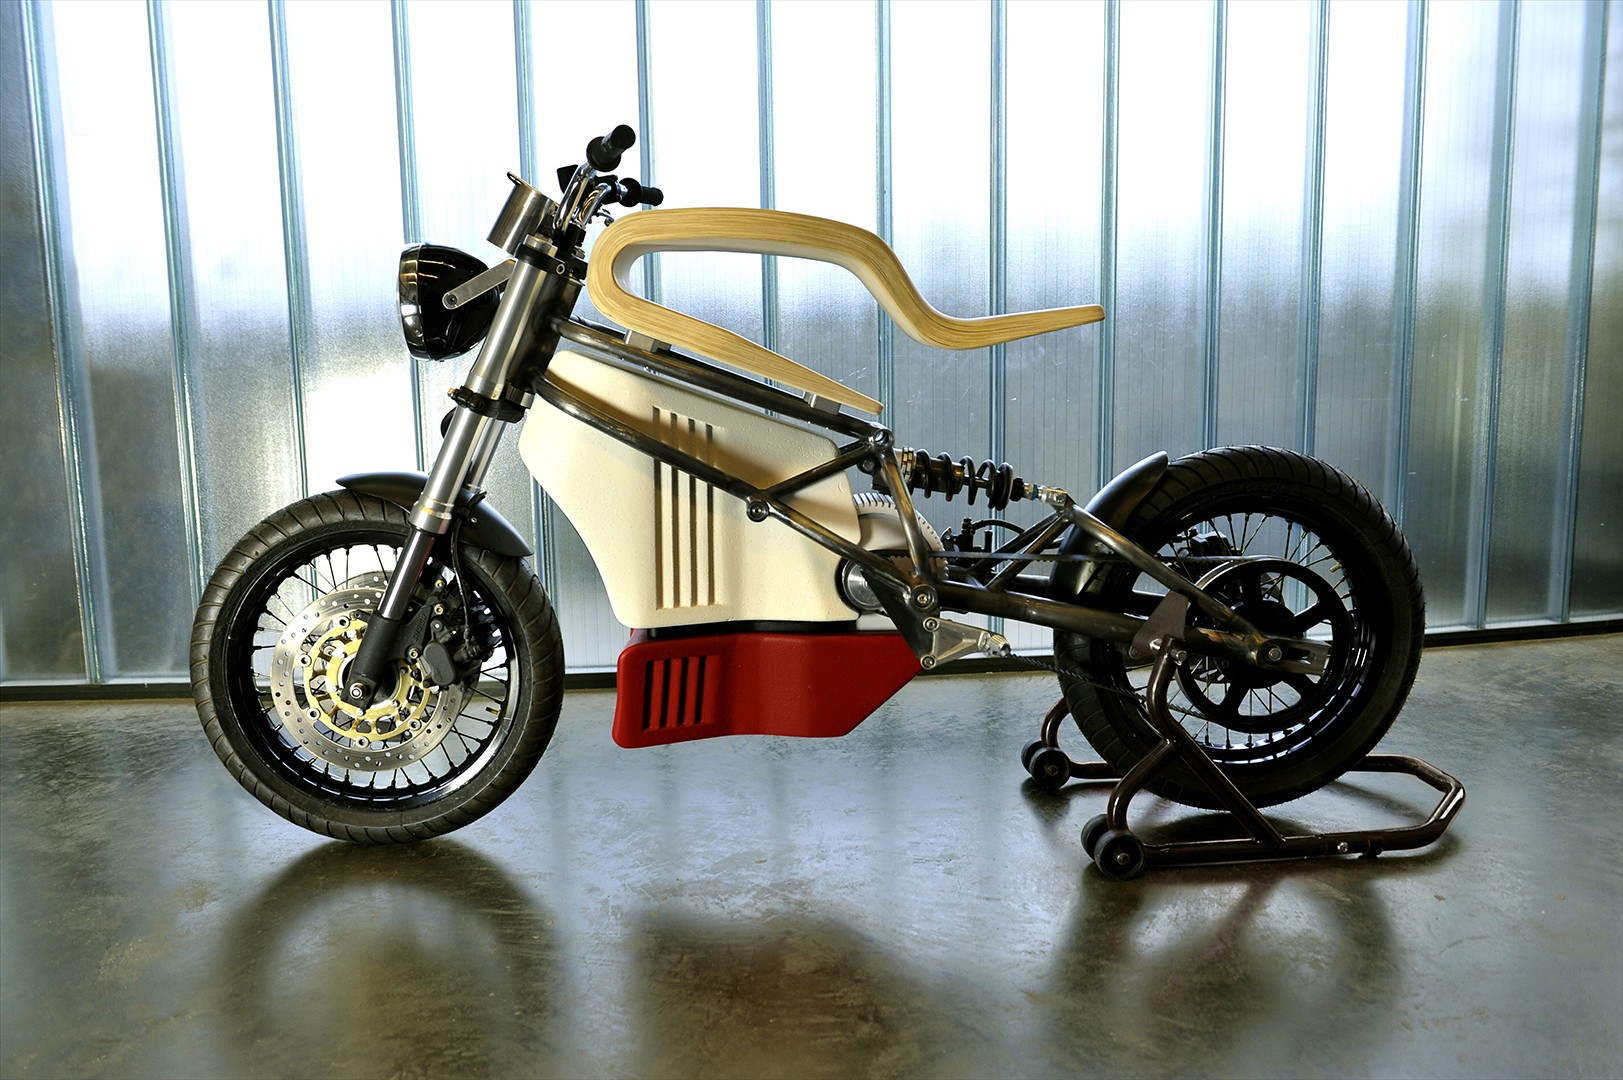 E-Raw Is an Electric Cafe-Racer Prototype with a Truly Raw Wooden Seat